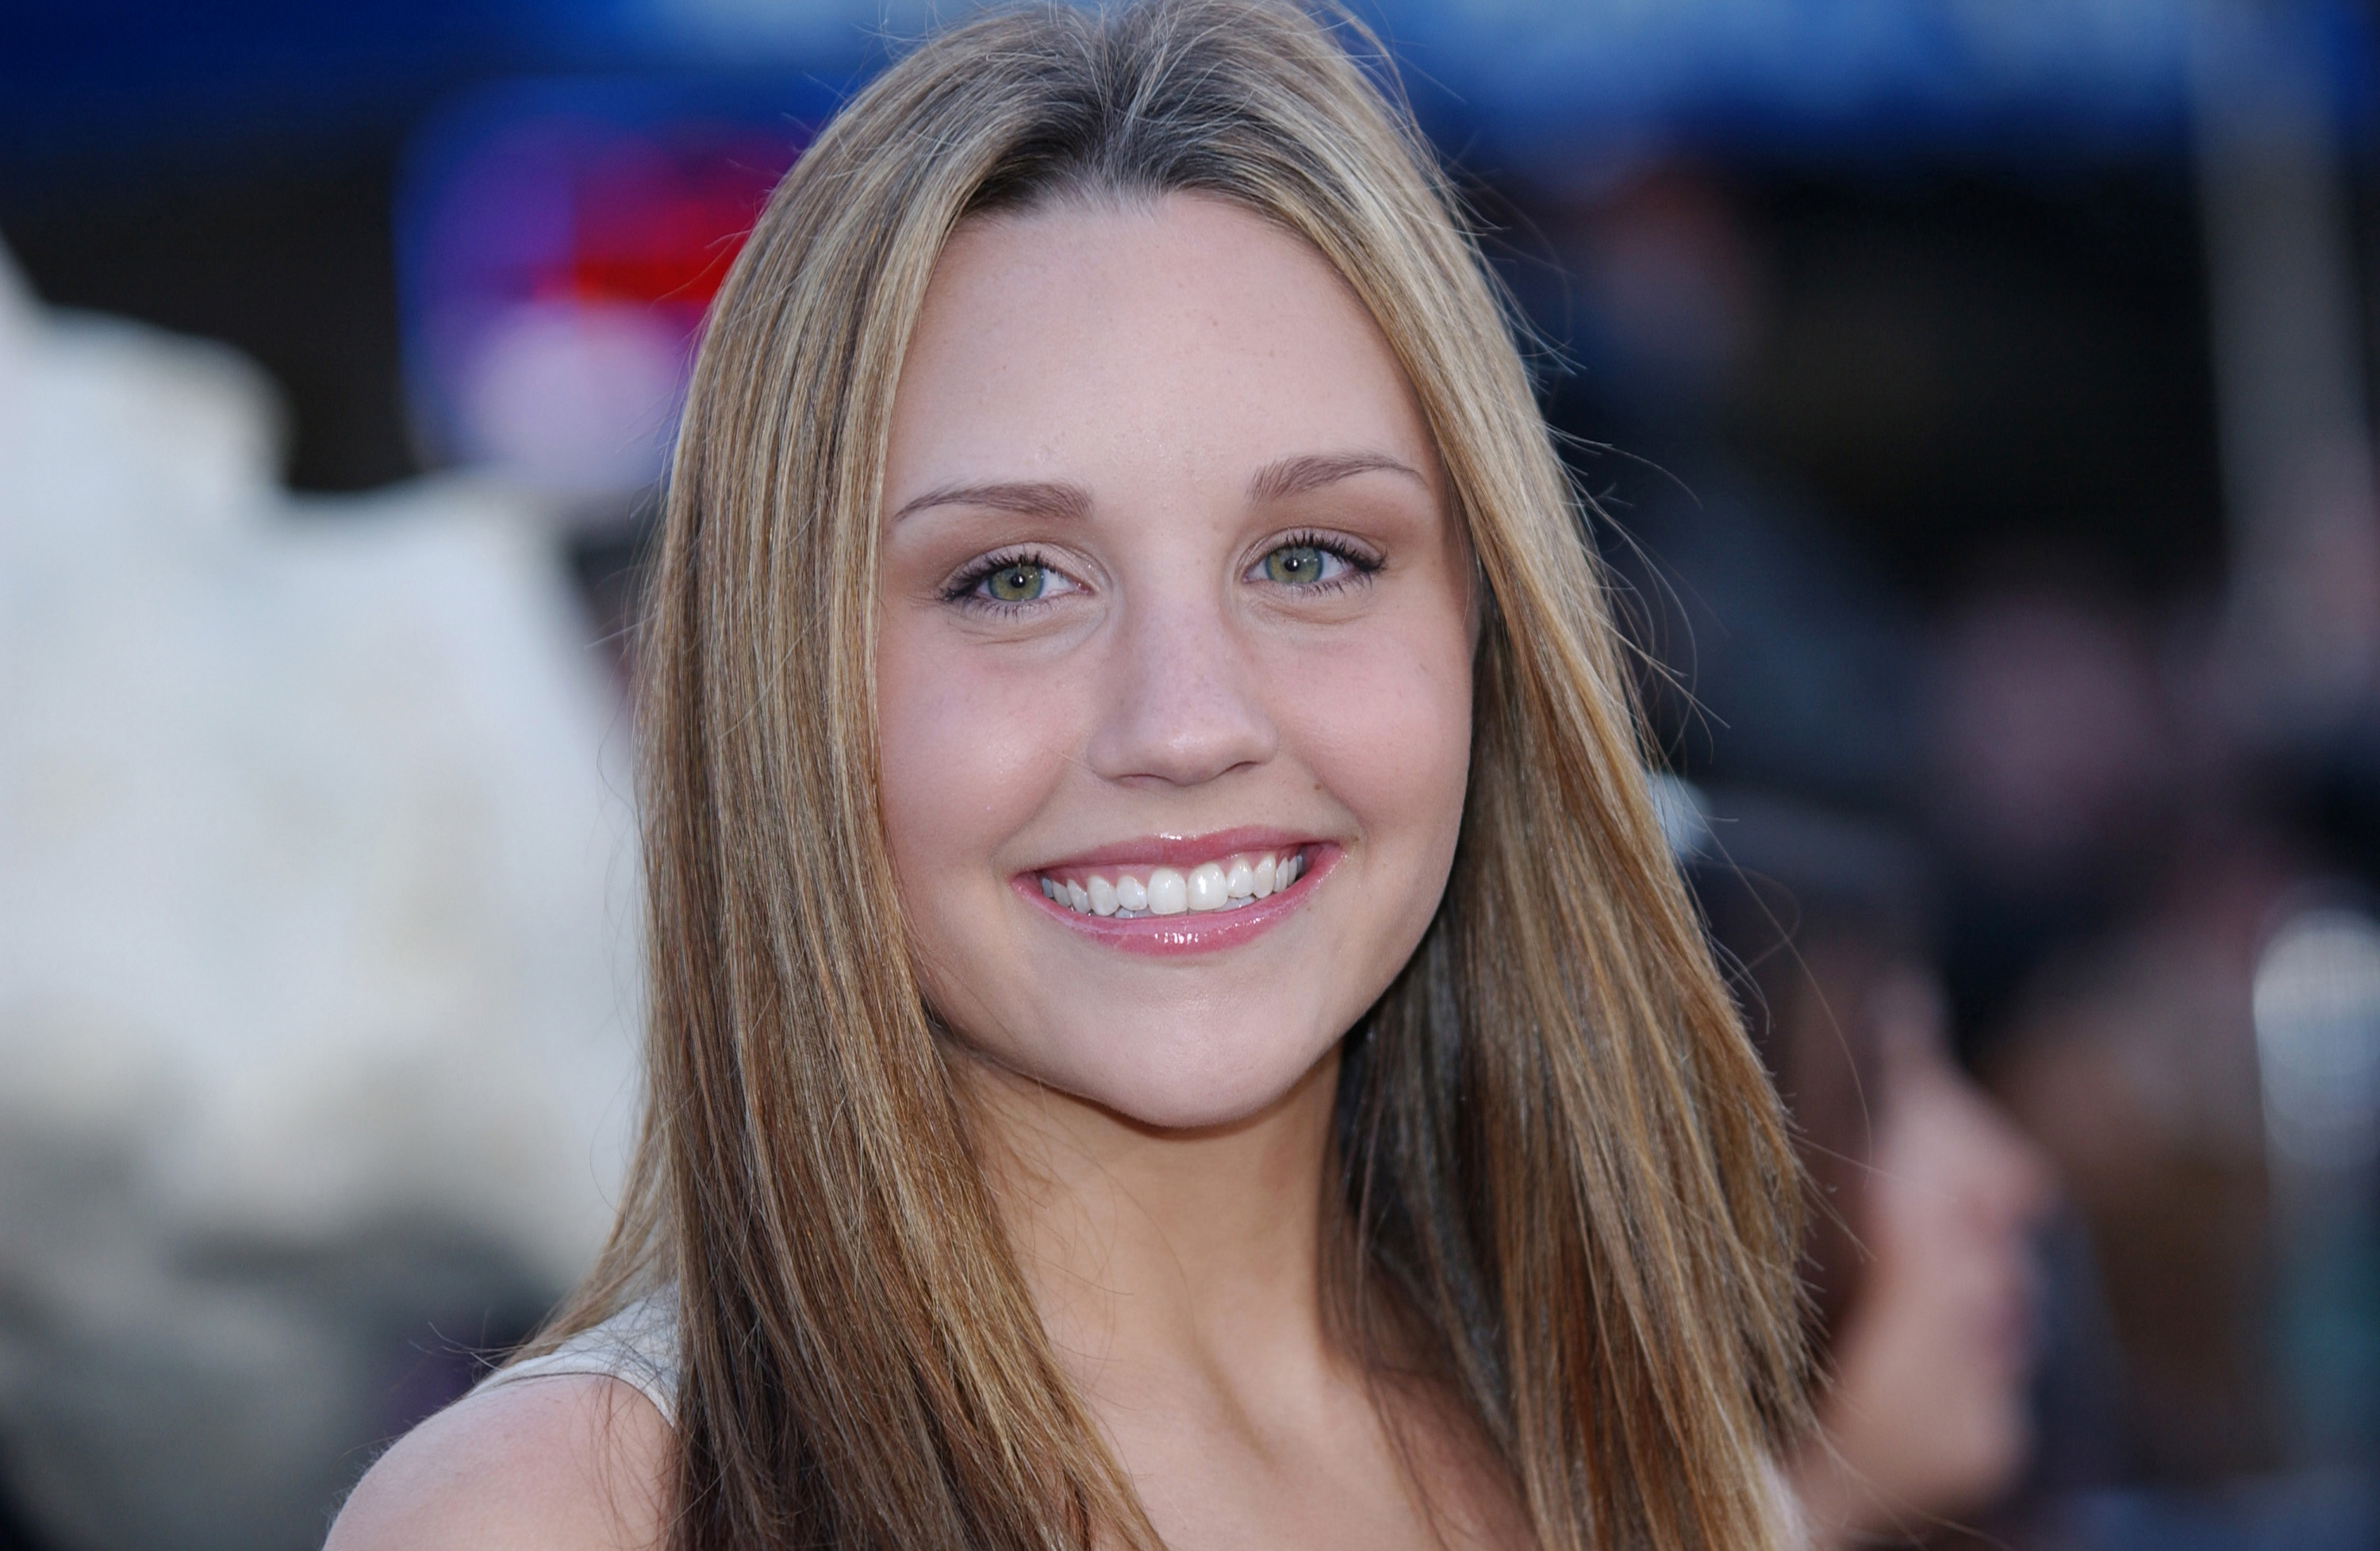 Amanda Bynes in Westwood, California, United States, circa May 7, 2003 | Source: Getty Images